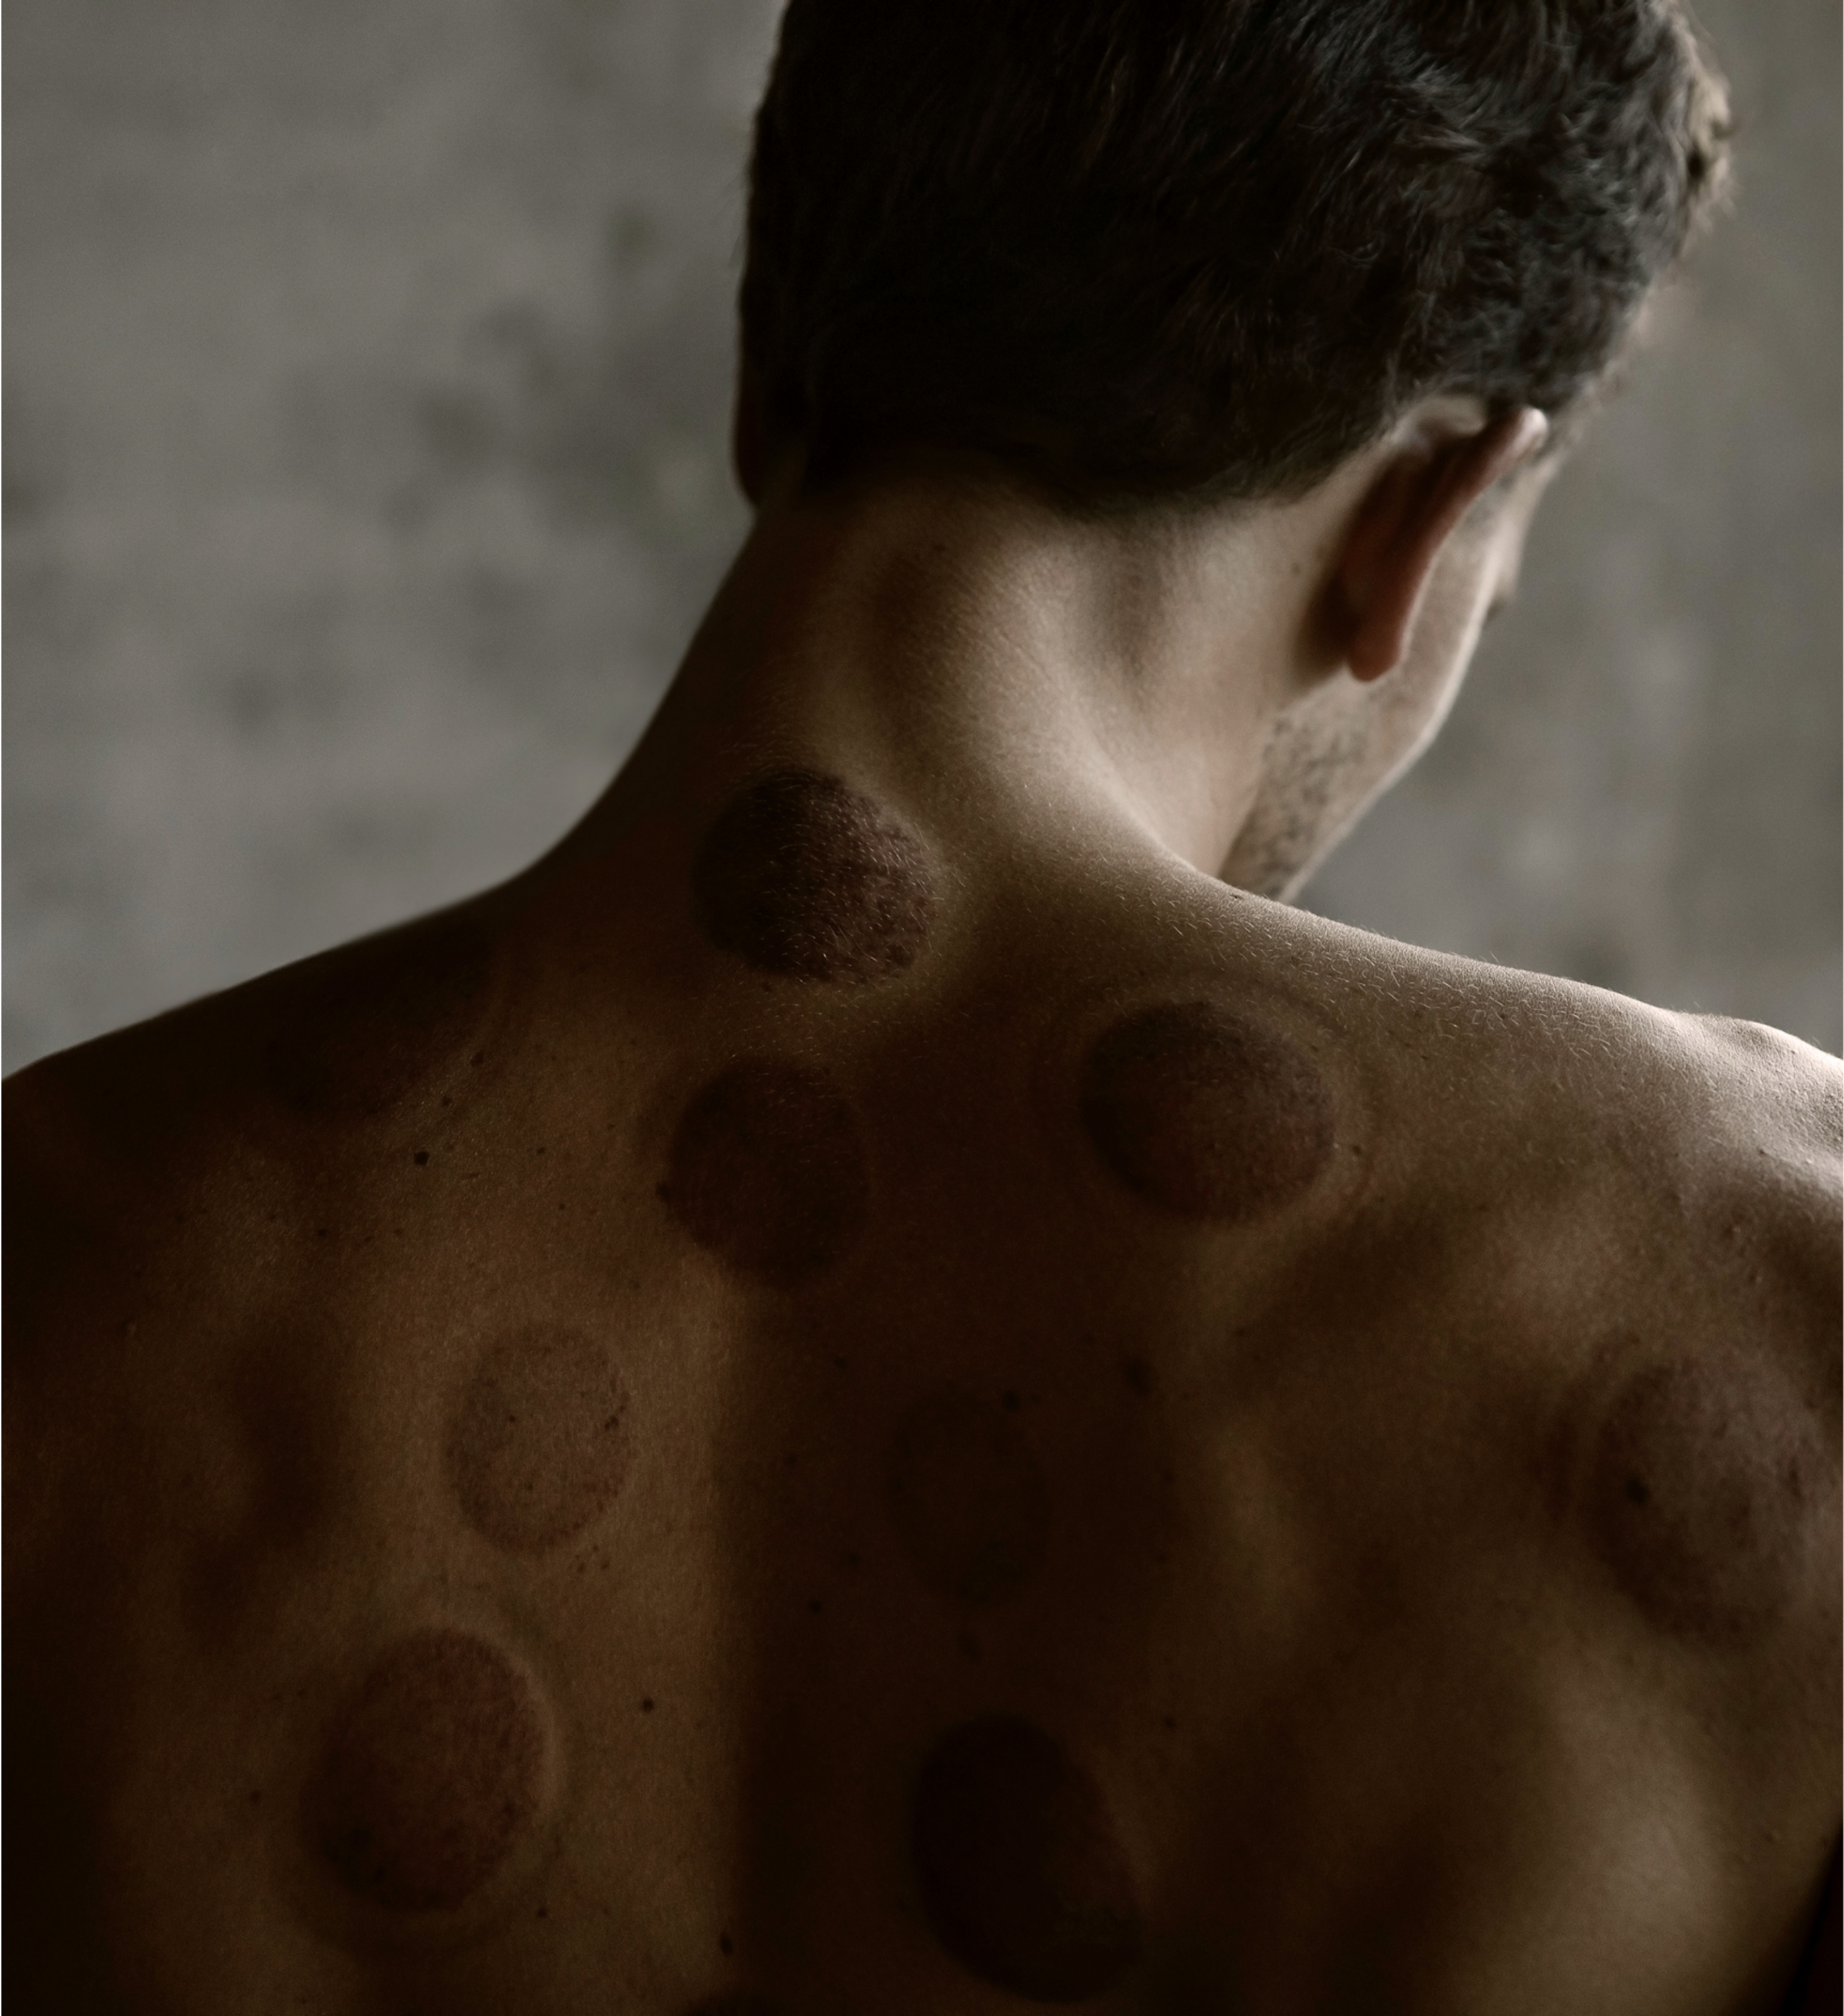 A man's back shows remnants of the cupping remedy